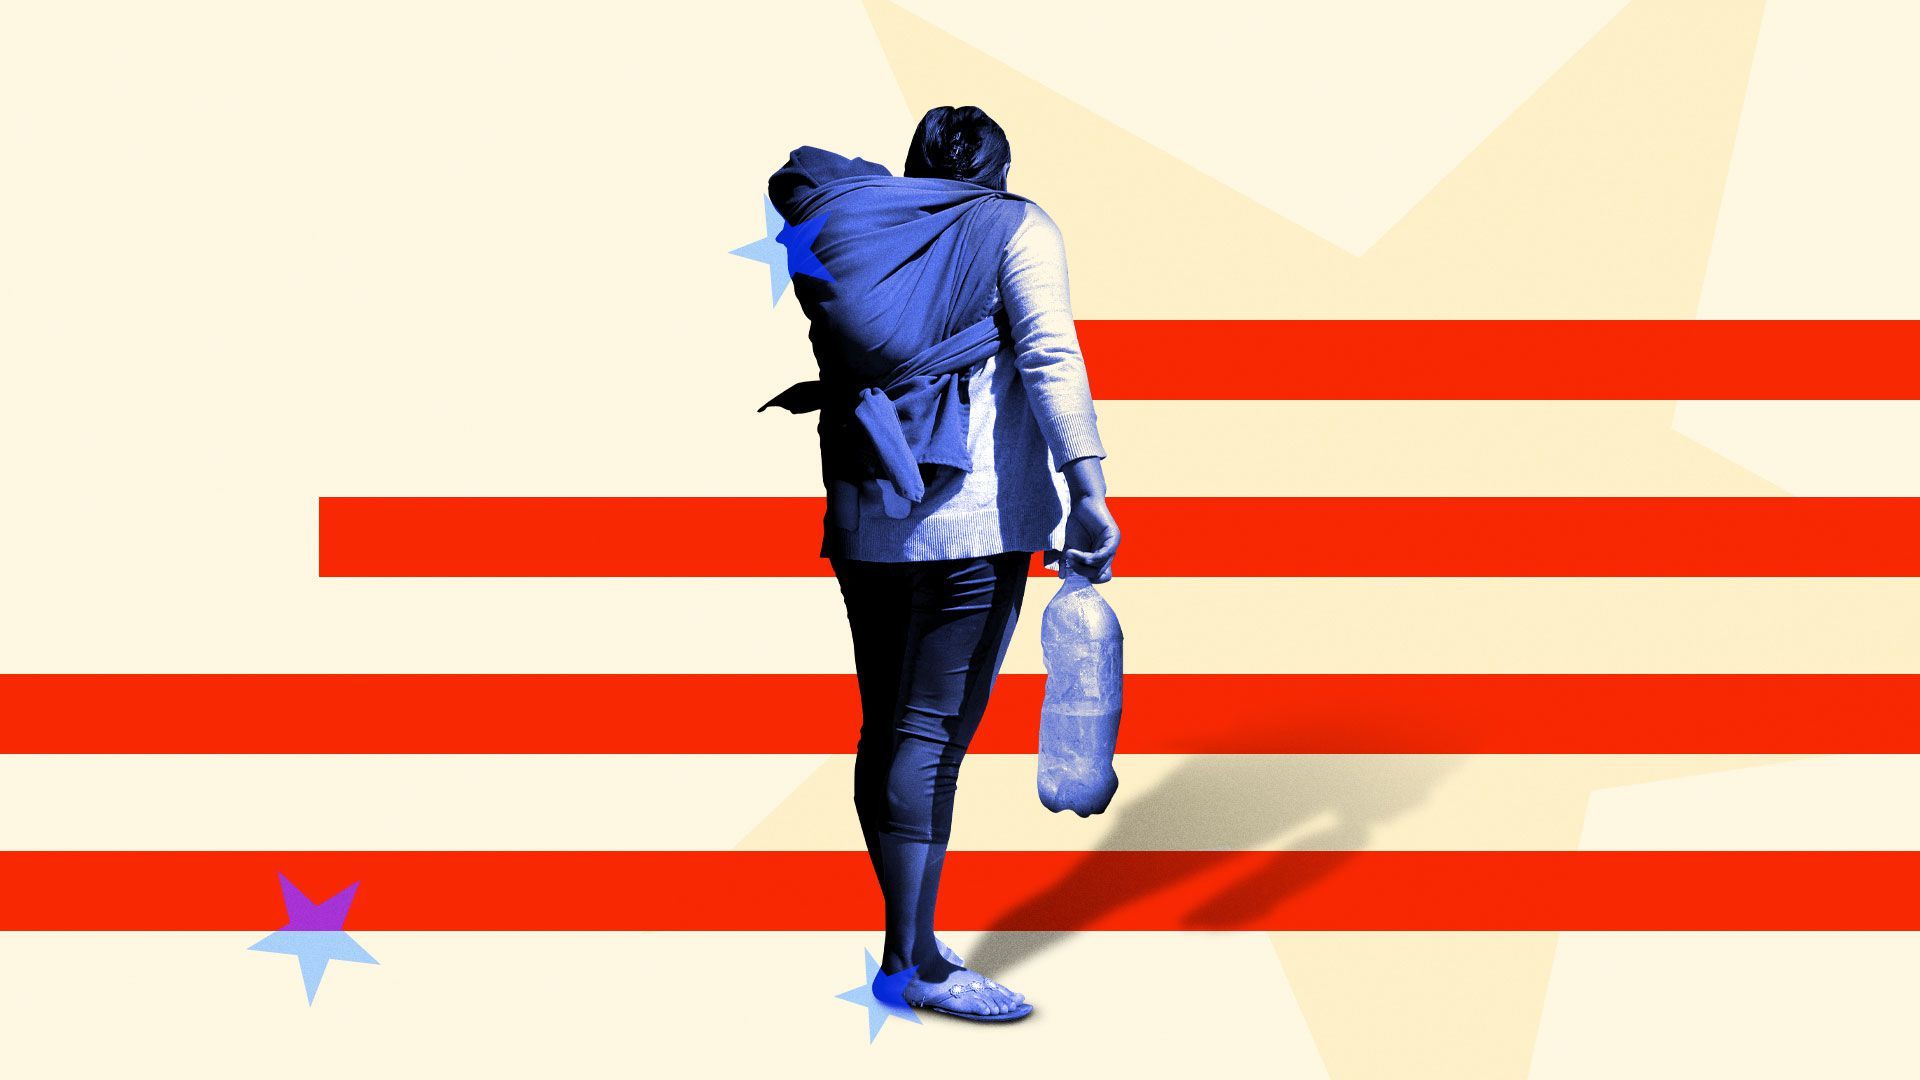 Illustration of a migrant woman with her young child walking towards stars and stripes